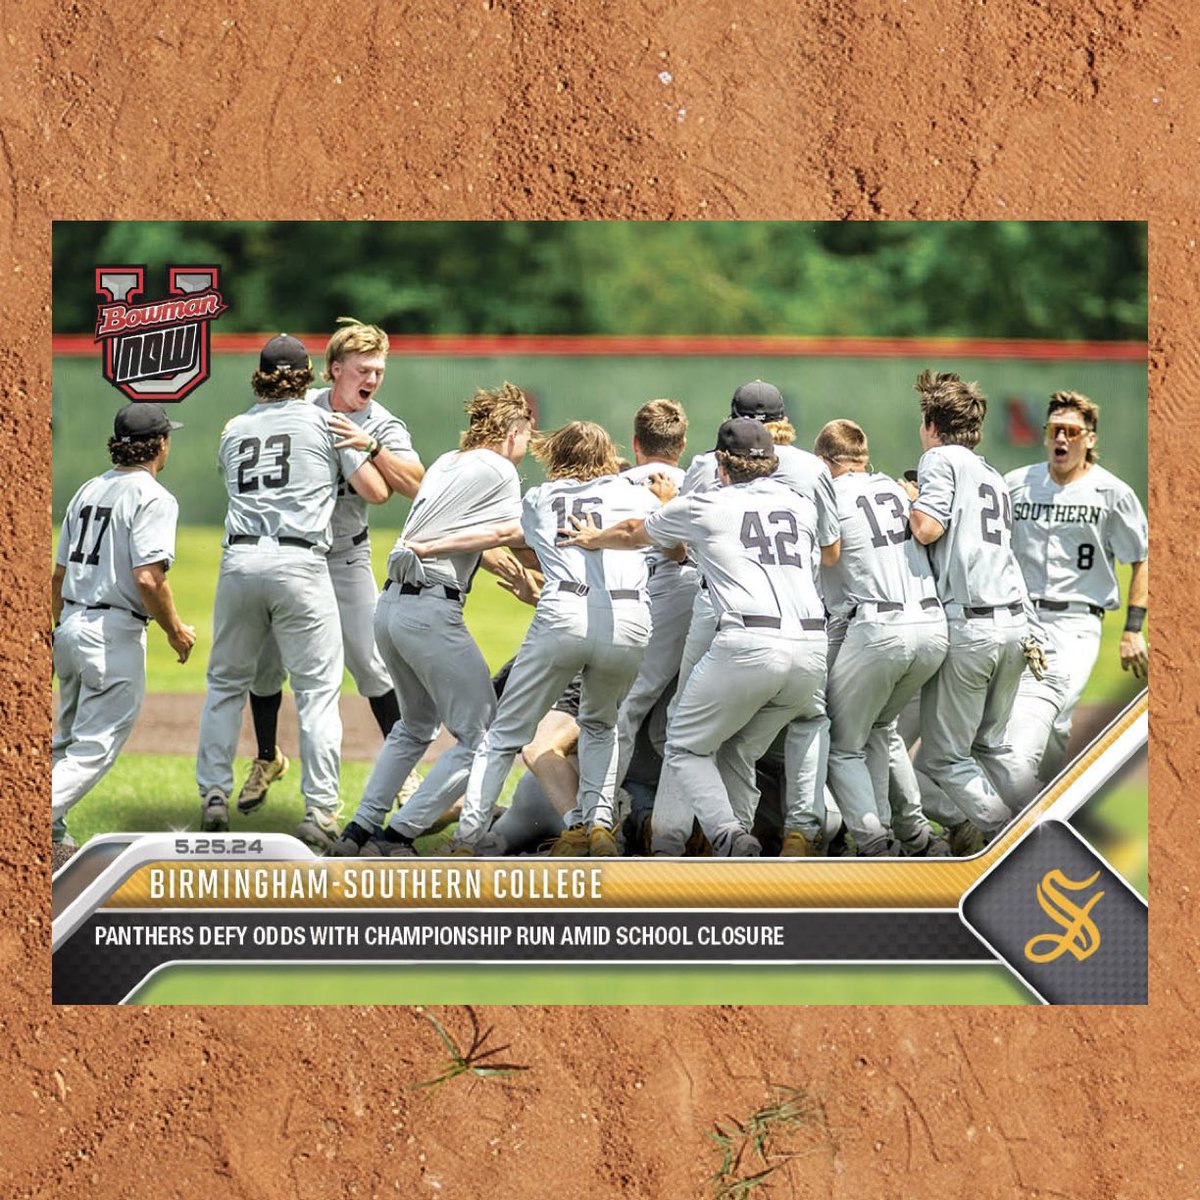 𝗝𝗨𝗦𝗧 𝗜𝗡: We’re making an official trading card of the Birmingham-Southern College baseball team. Despite the college PERMANENTLY CLOSING, their baseball team has made the NCAA College World Series. A portion of the proceeds from these cards will be given to the baseball